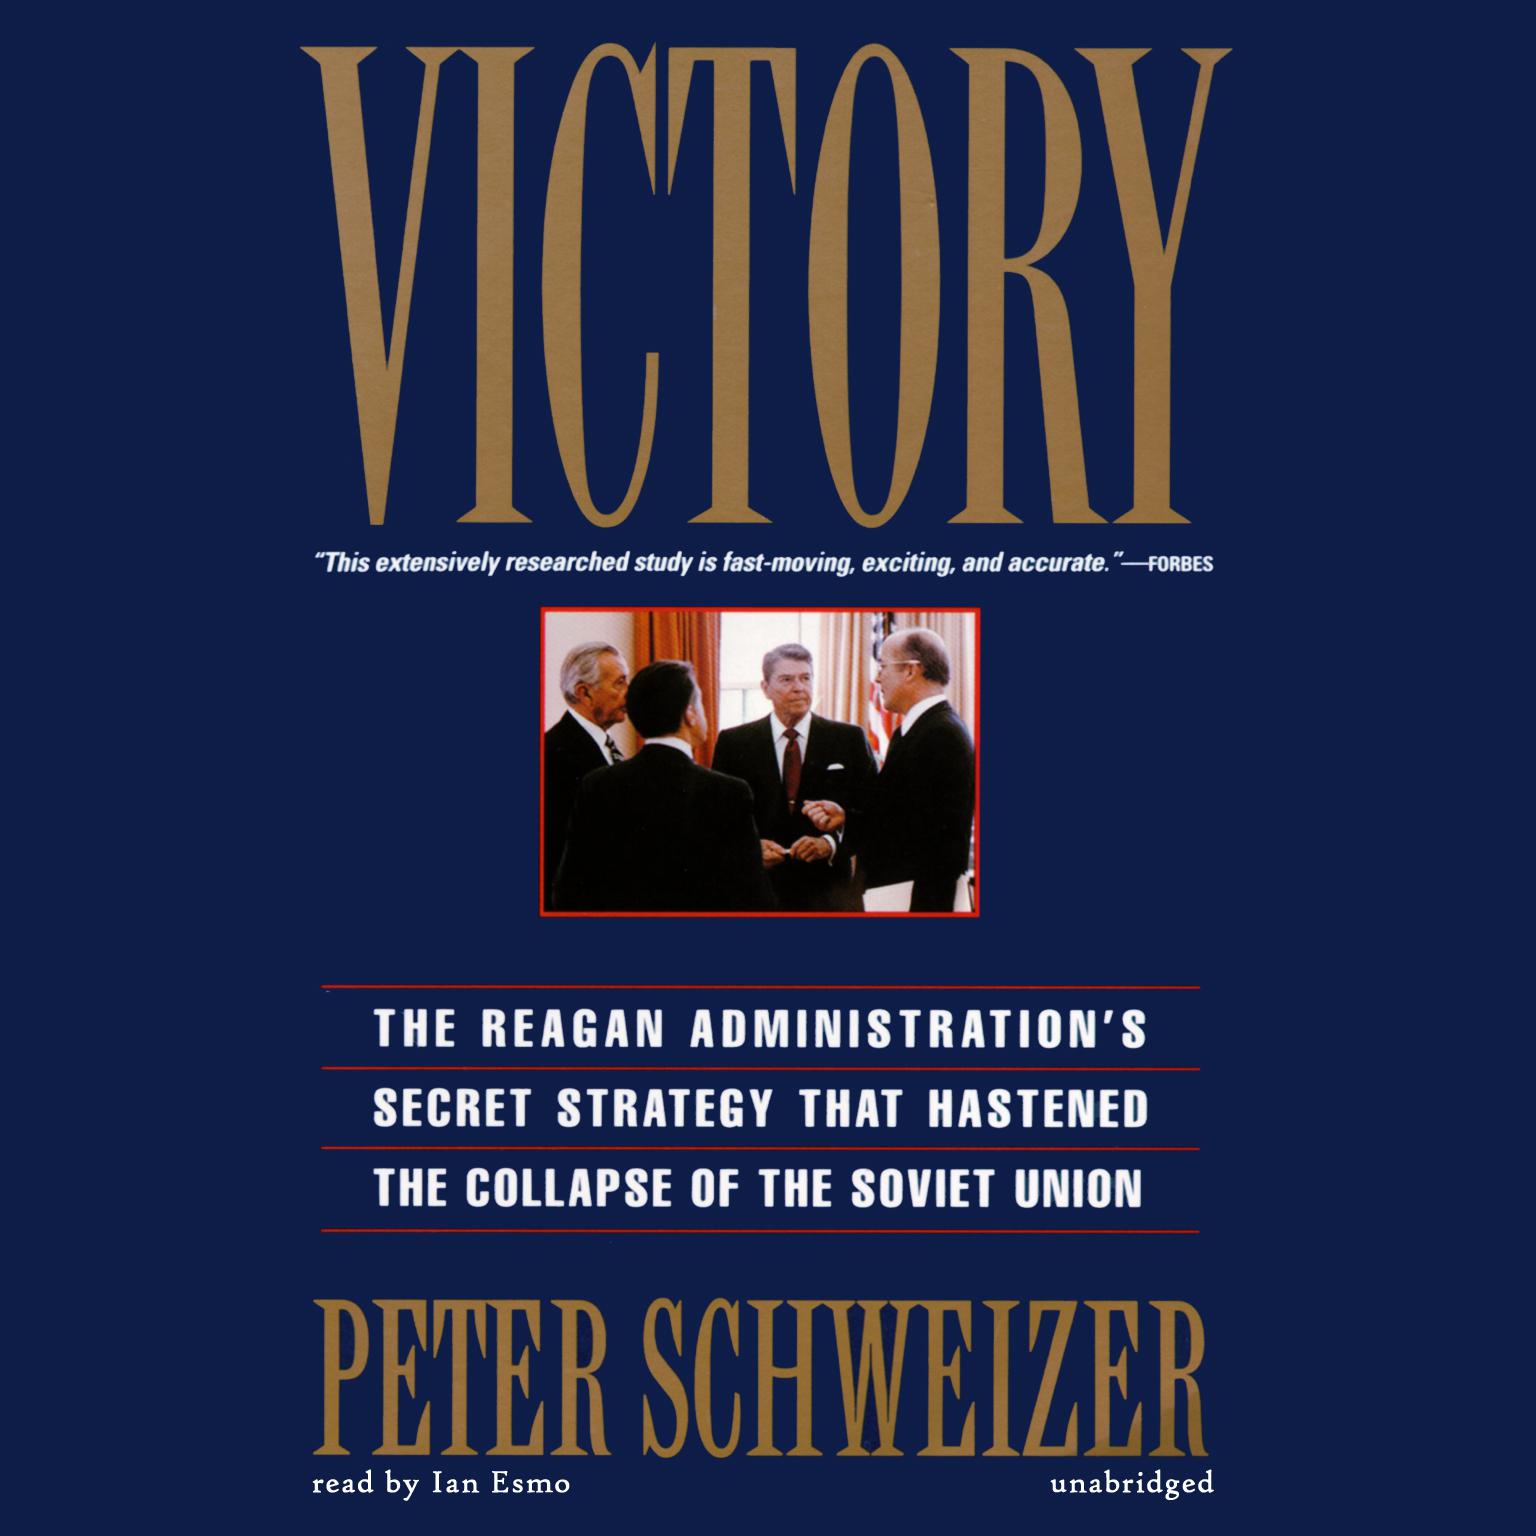 Victory: The Reagan Administration’s Secret Strategy That Hastened the Collapse of the Soviet Union Audiobook, by Peter Schweizer